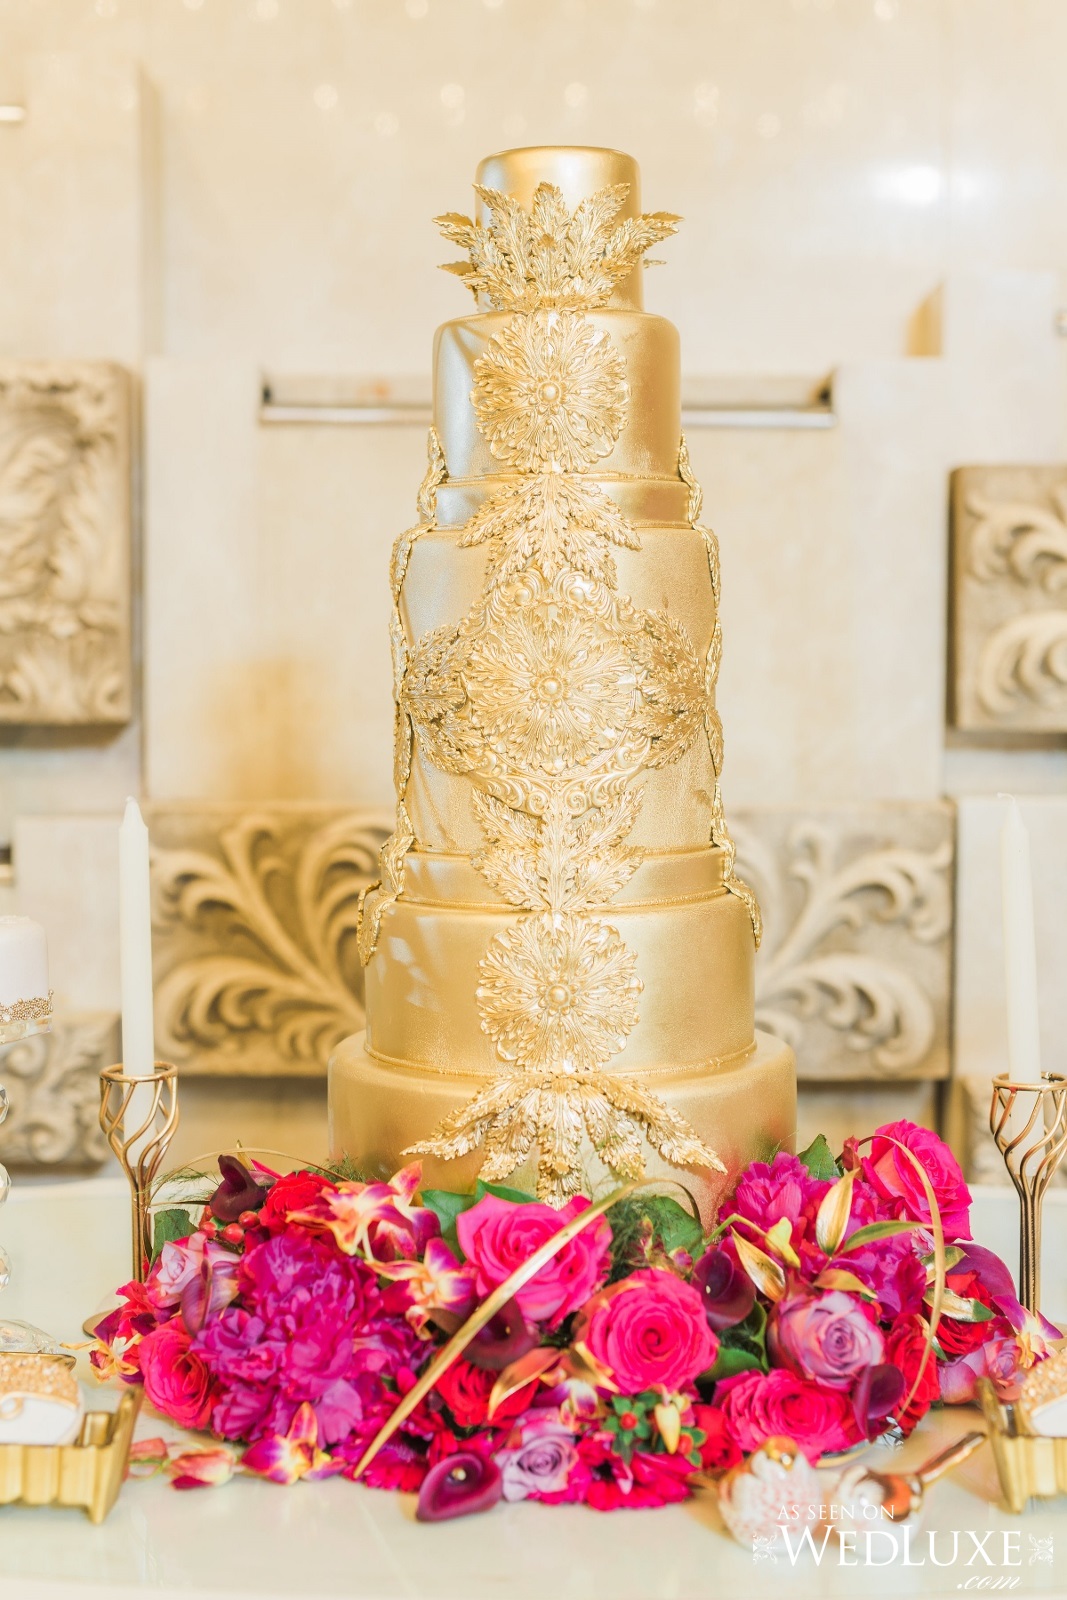 Gorgeous, gold wedding cake at the Victorian Convention centre, Missisauga. Decorated with real flowers at the bottom tier, such as hot pink gerbera daisy, fuscia dendrobium orchids, gold foliage, pink calla lily, hot pink rose. Flower and decor by Secrets Floral.